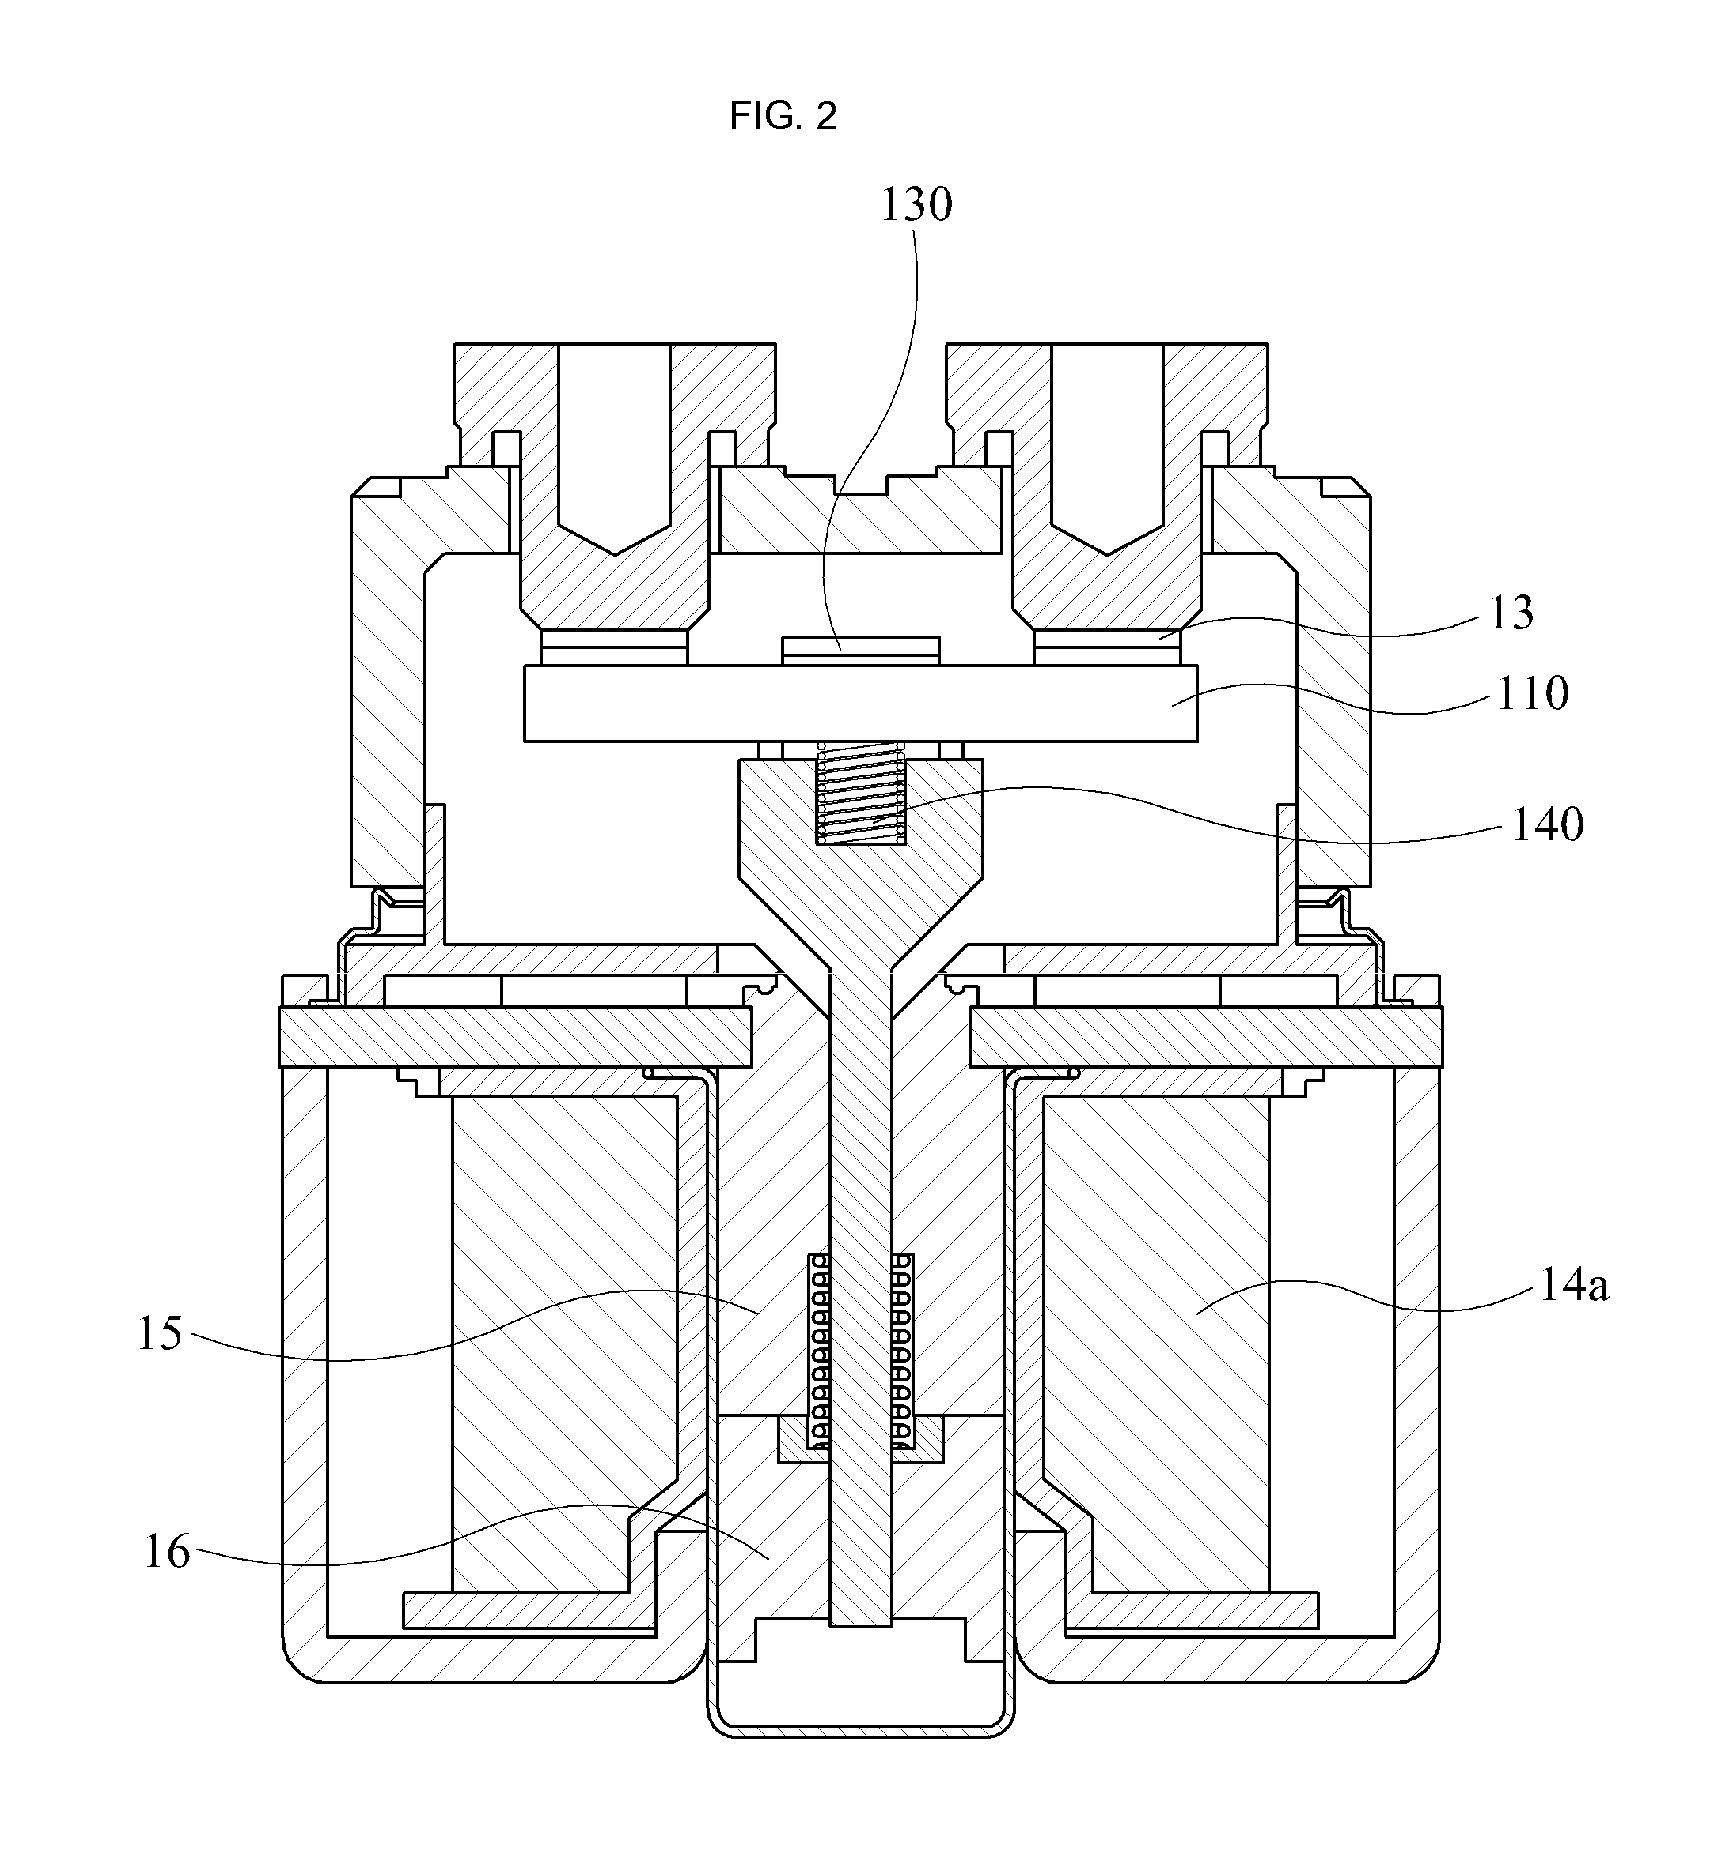 Movable contact assembly of electromagnetic switch